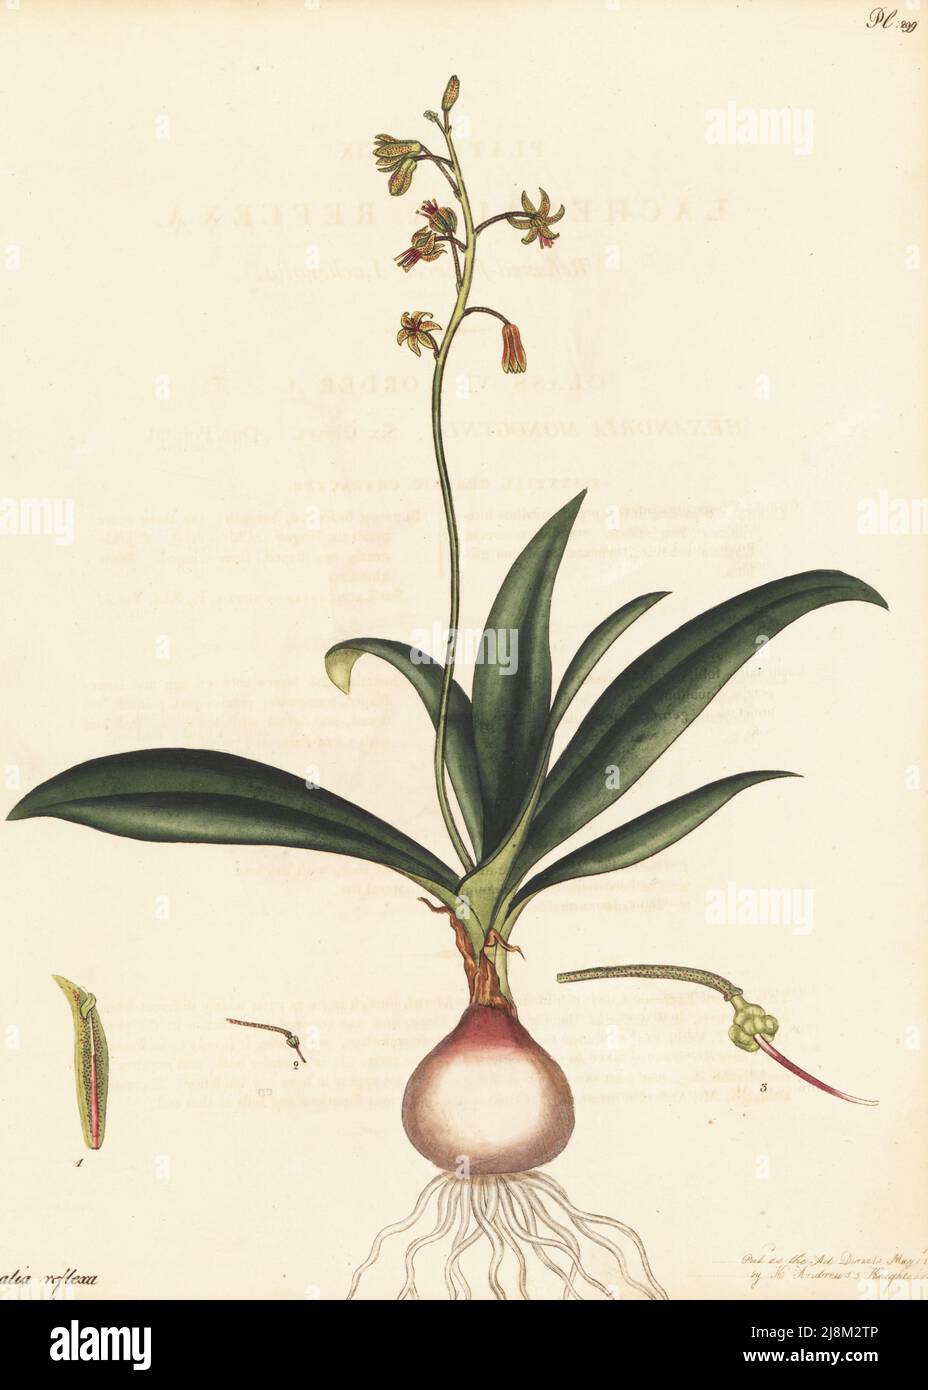 Ledebouria ovalifolia. Reflexed-flowered lachenalia, Lachenalia reflexa. From the Cape of Good Hope, South Africa, in the James Vere nursery at Kensington Gore. Copperplate engraving drawn, engraved and hand-coloured by Henry Andrews from his Botanical Register, Volume 5, self-published in Knightsbridge, London, 1803. Stock Photo